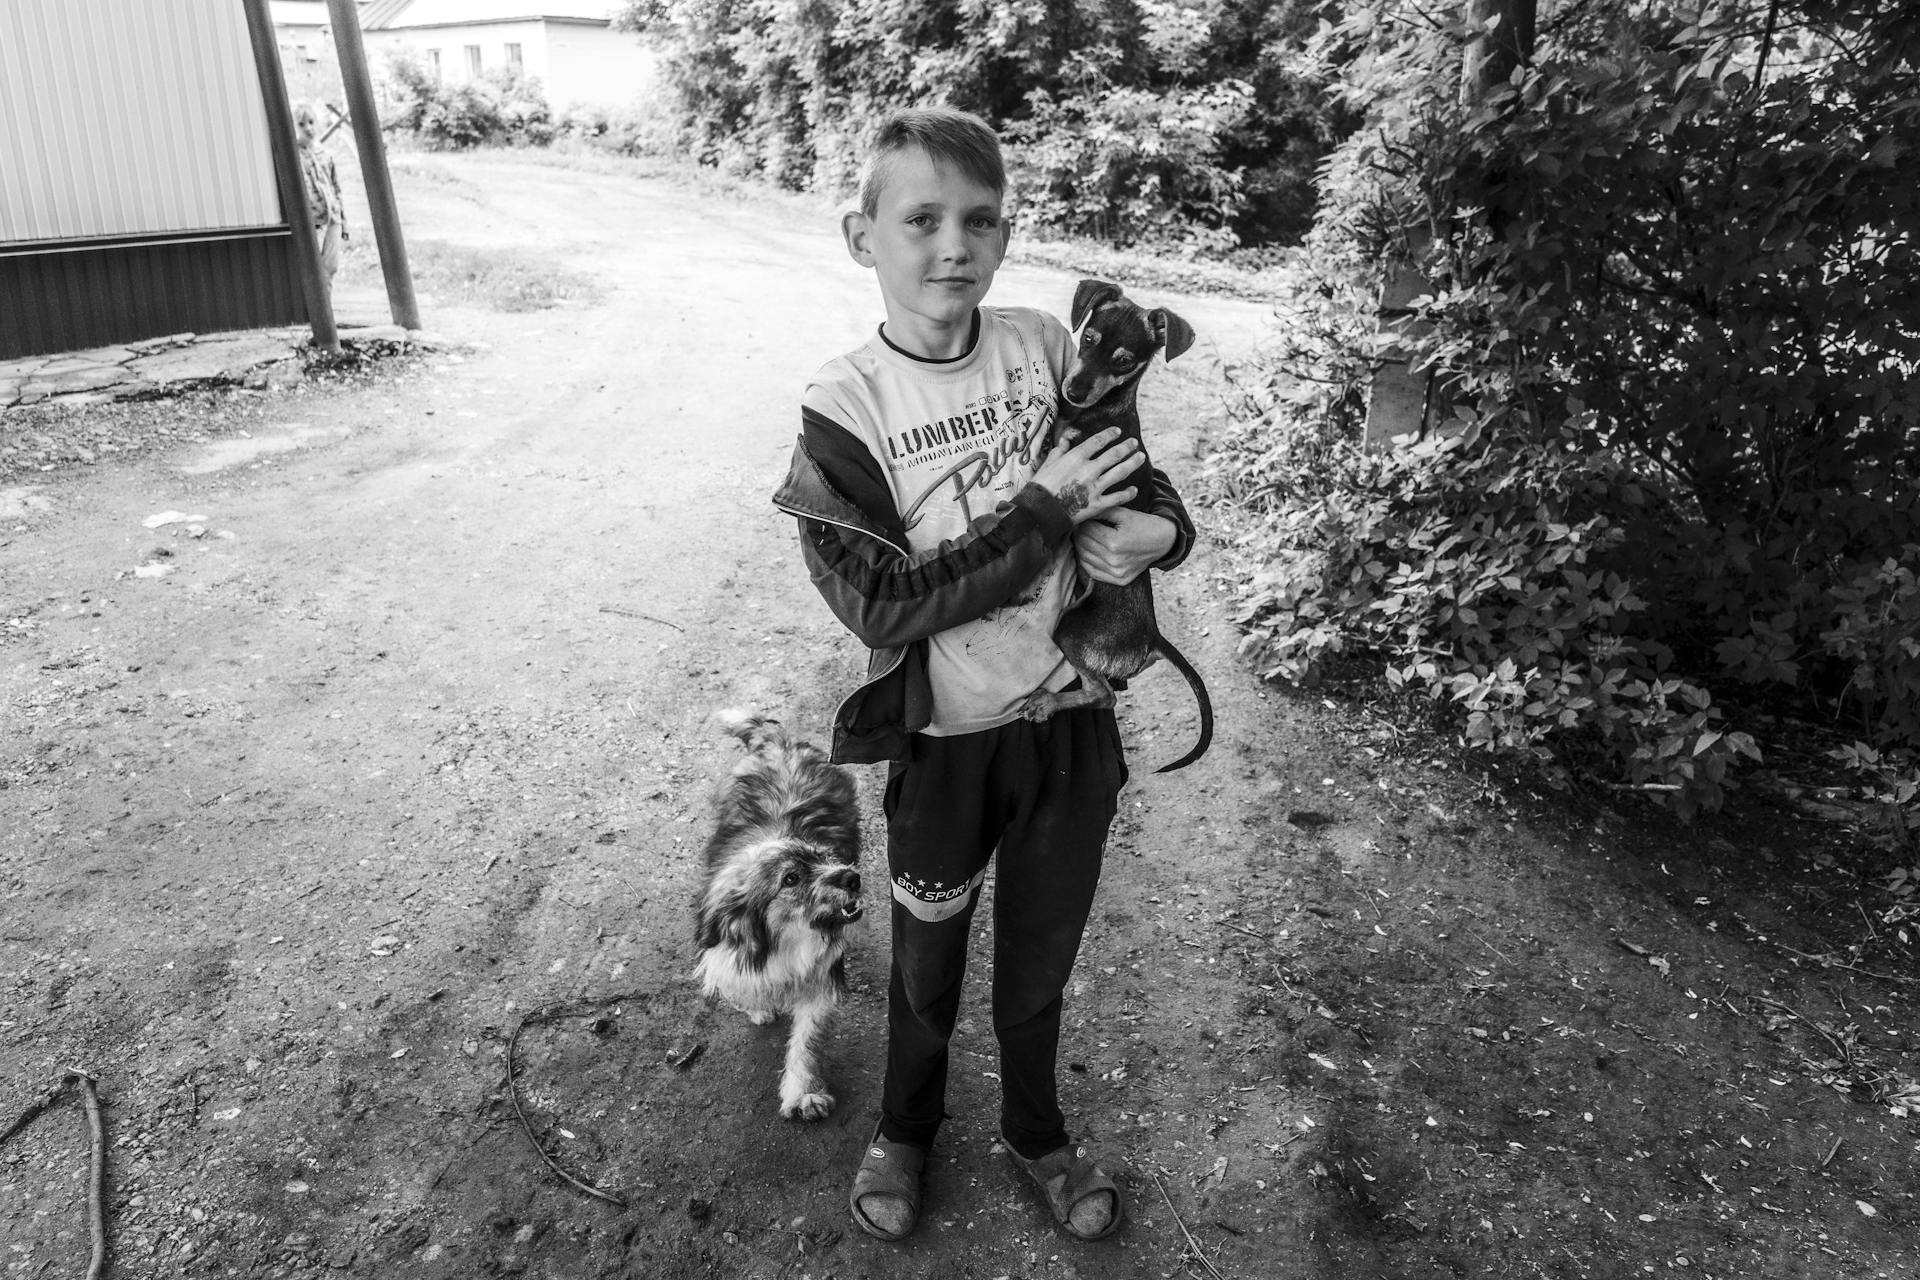 Young Boy Holding  Short Coated Small Dog